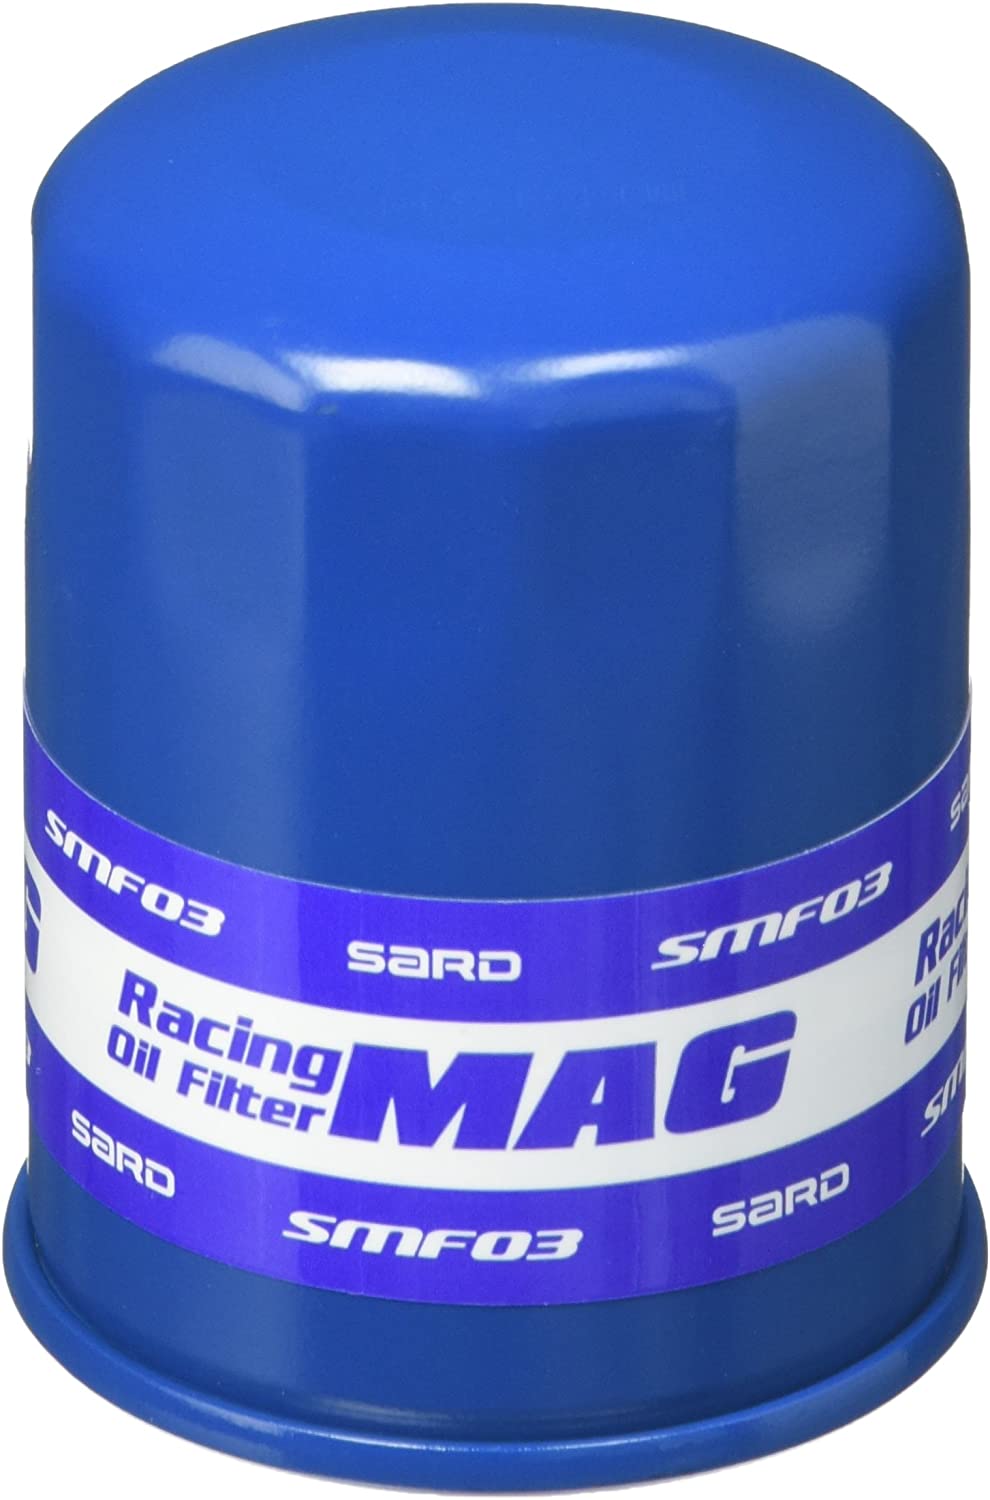 SARD RACING OIL FILTER For STREAM RN1 RN2 SMF03